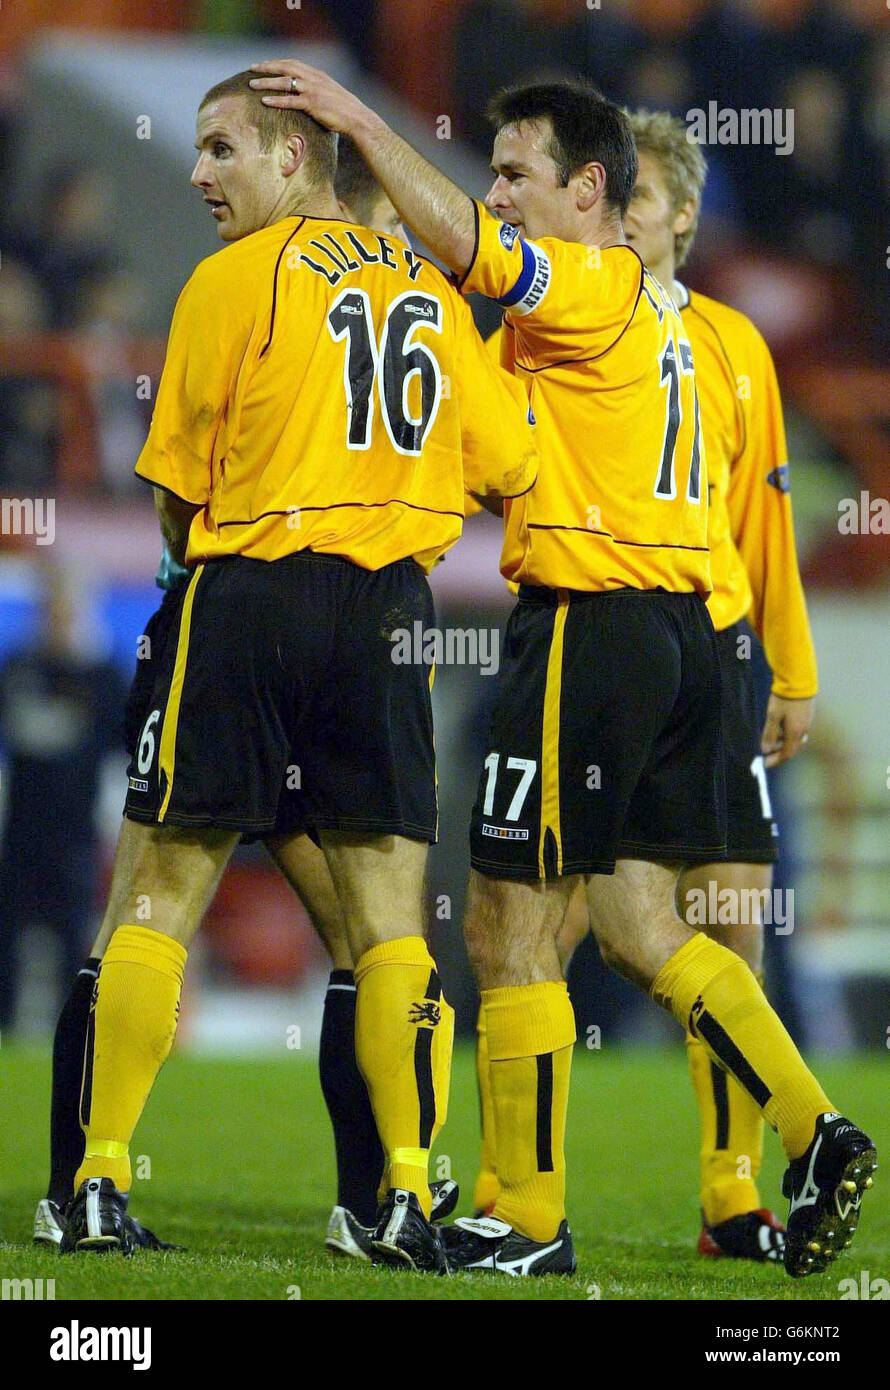 Livingston's Derek Lilley (left) celebrates with teammates after scoring against Aberdeen, during their CIS Insurance Cup quarter-final match at the Pittodrie Stadium, Aberdeen. NO UNOFFICIAL CLUB WEBSITE USE. Stock Photo